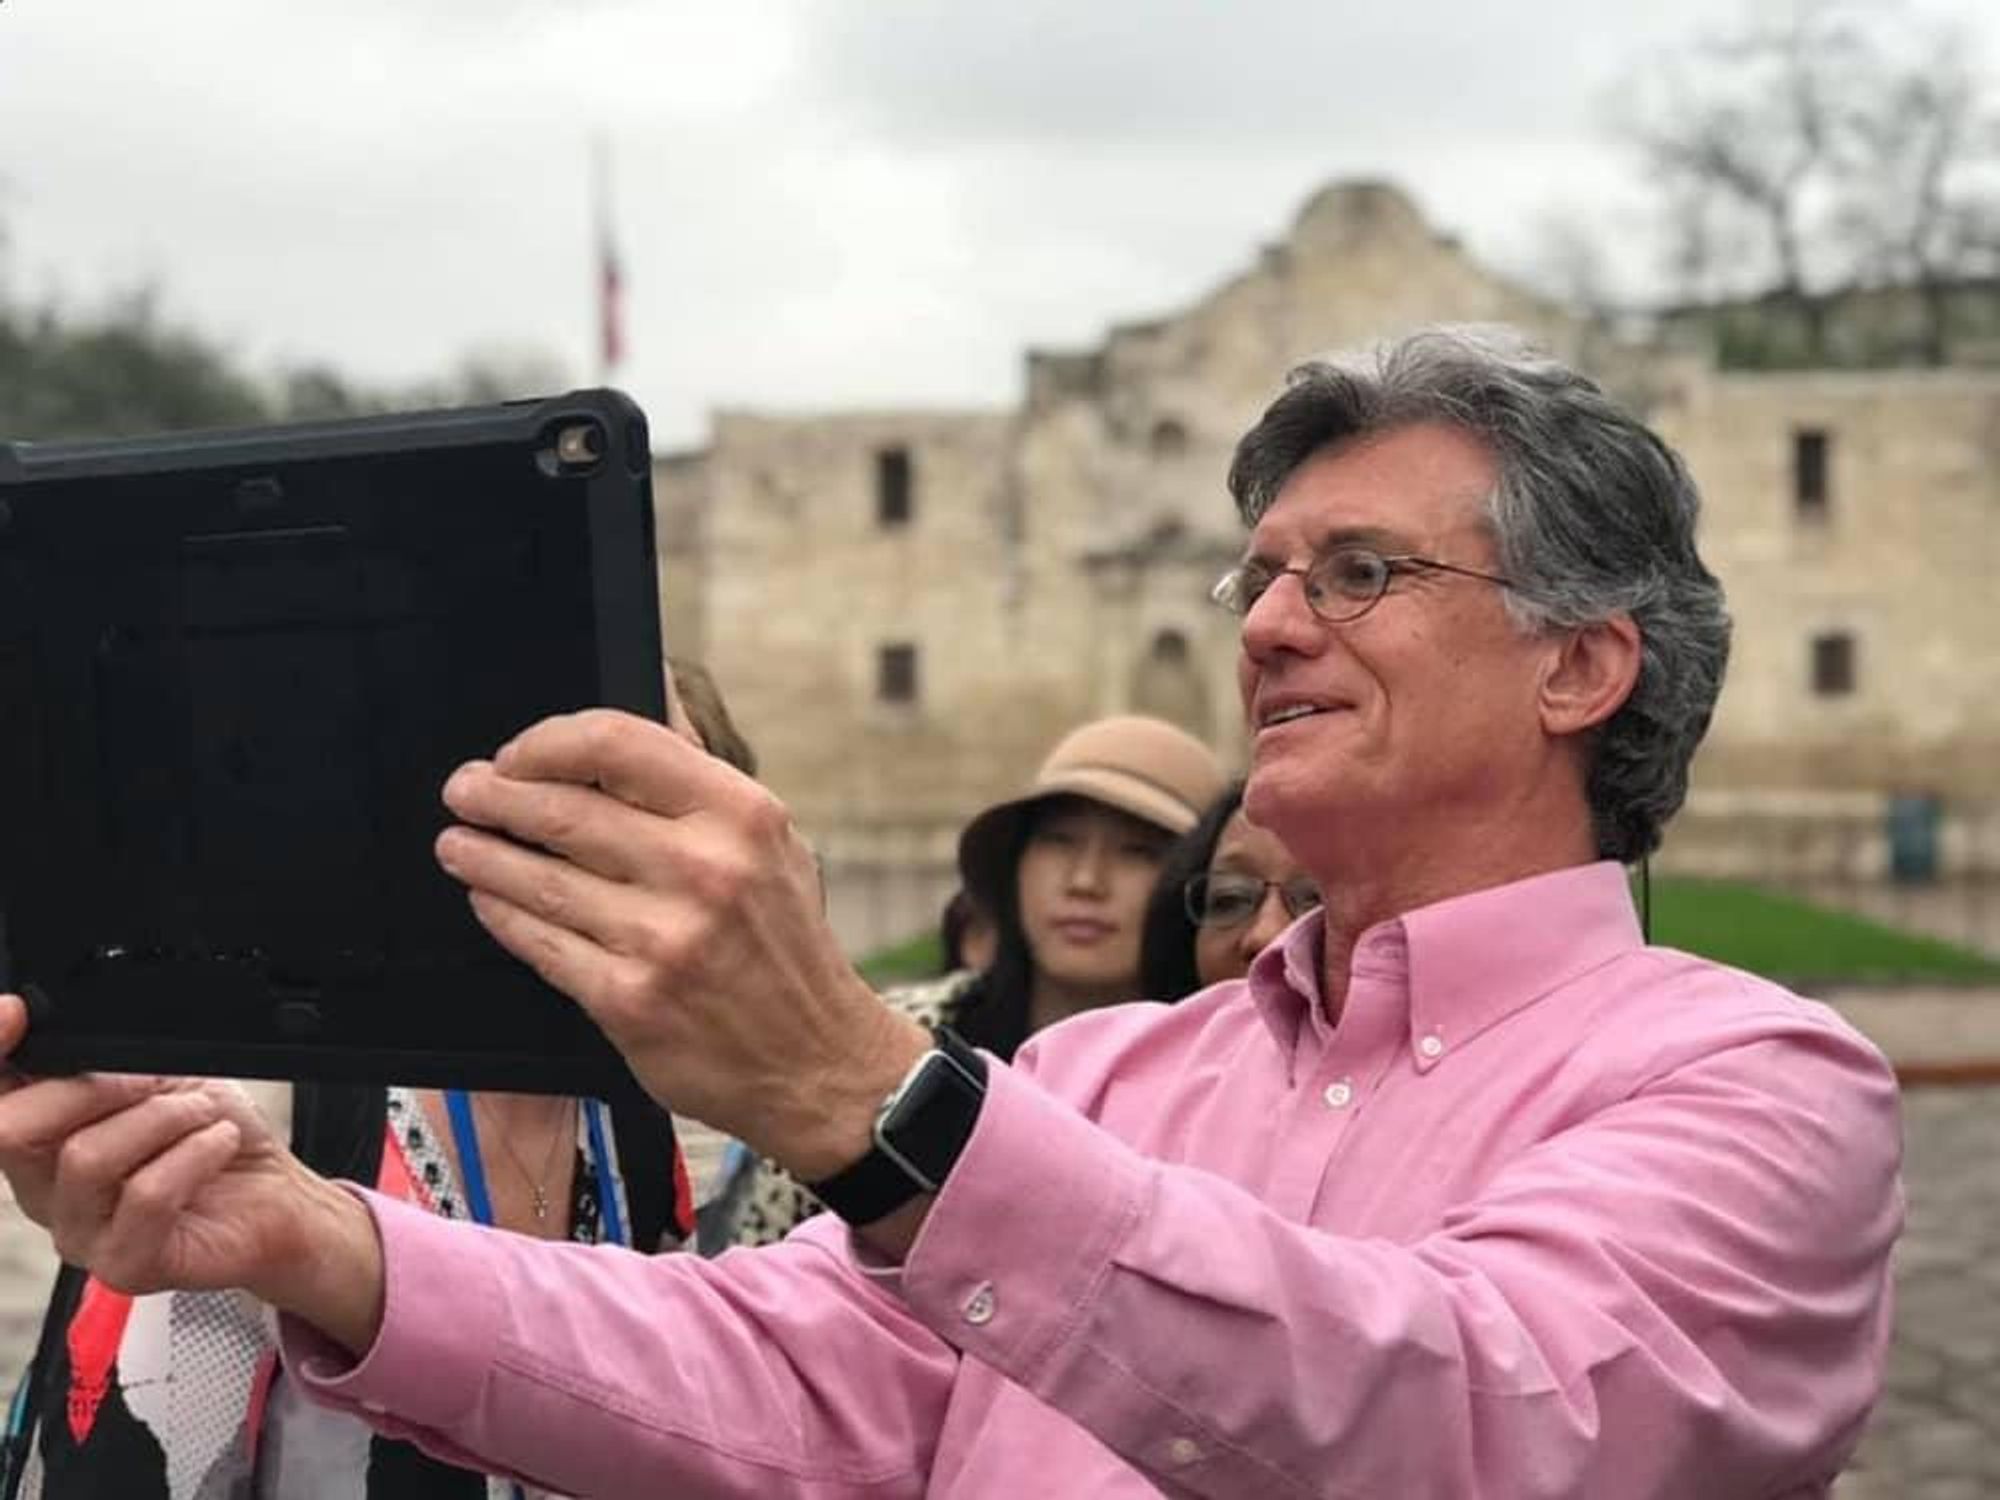 San Antonio company QuantumERA's Alamo Edition suite of apps and interactive products recently received an industry award.